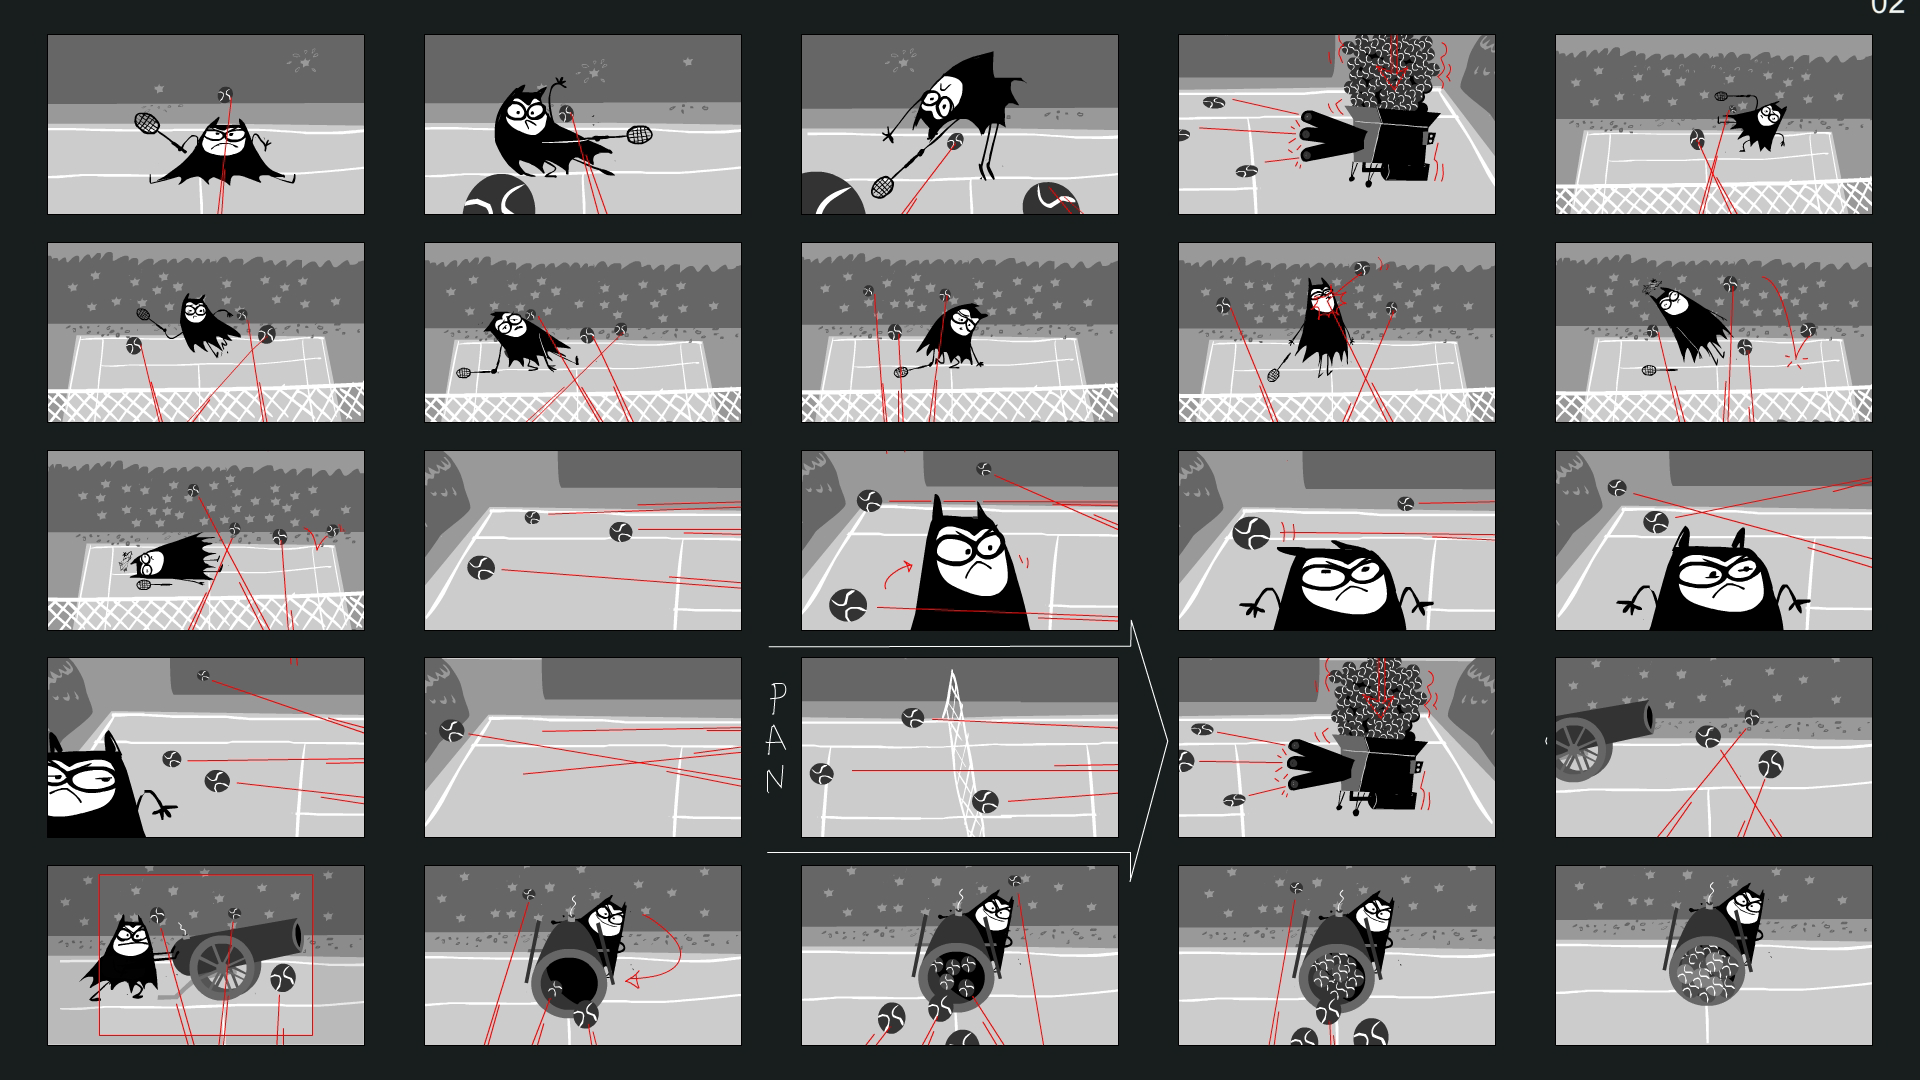 MikeOwens_STORYBOARDS_LilBat_Tennis_Page_2.png